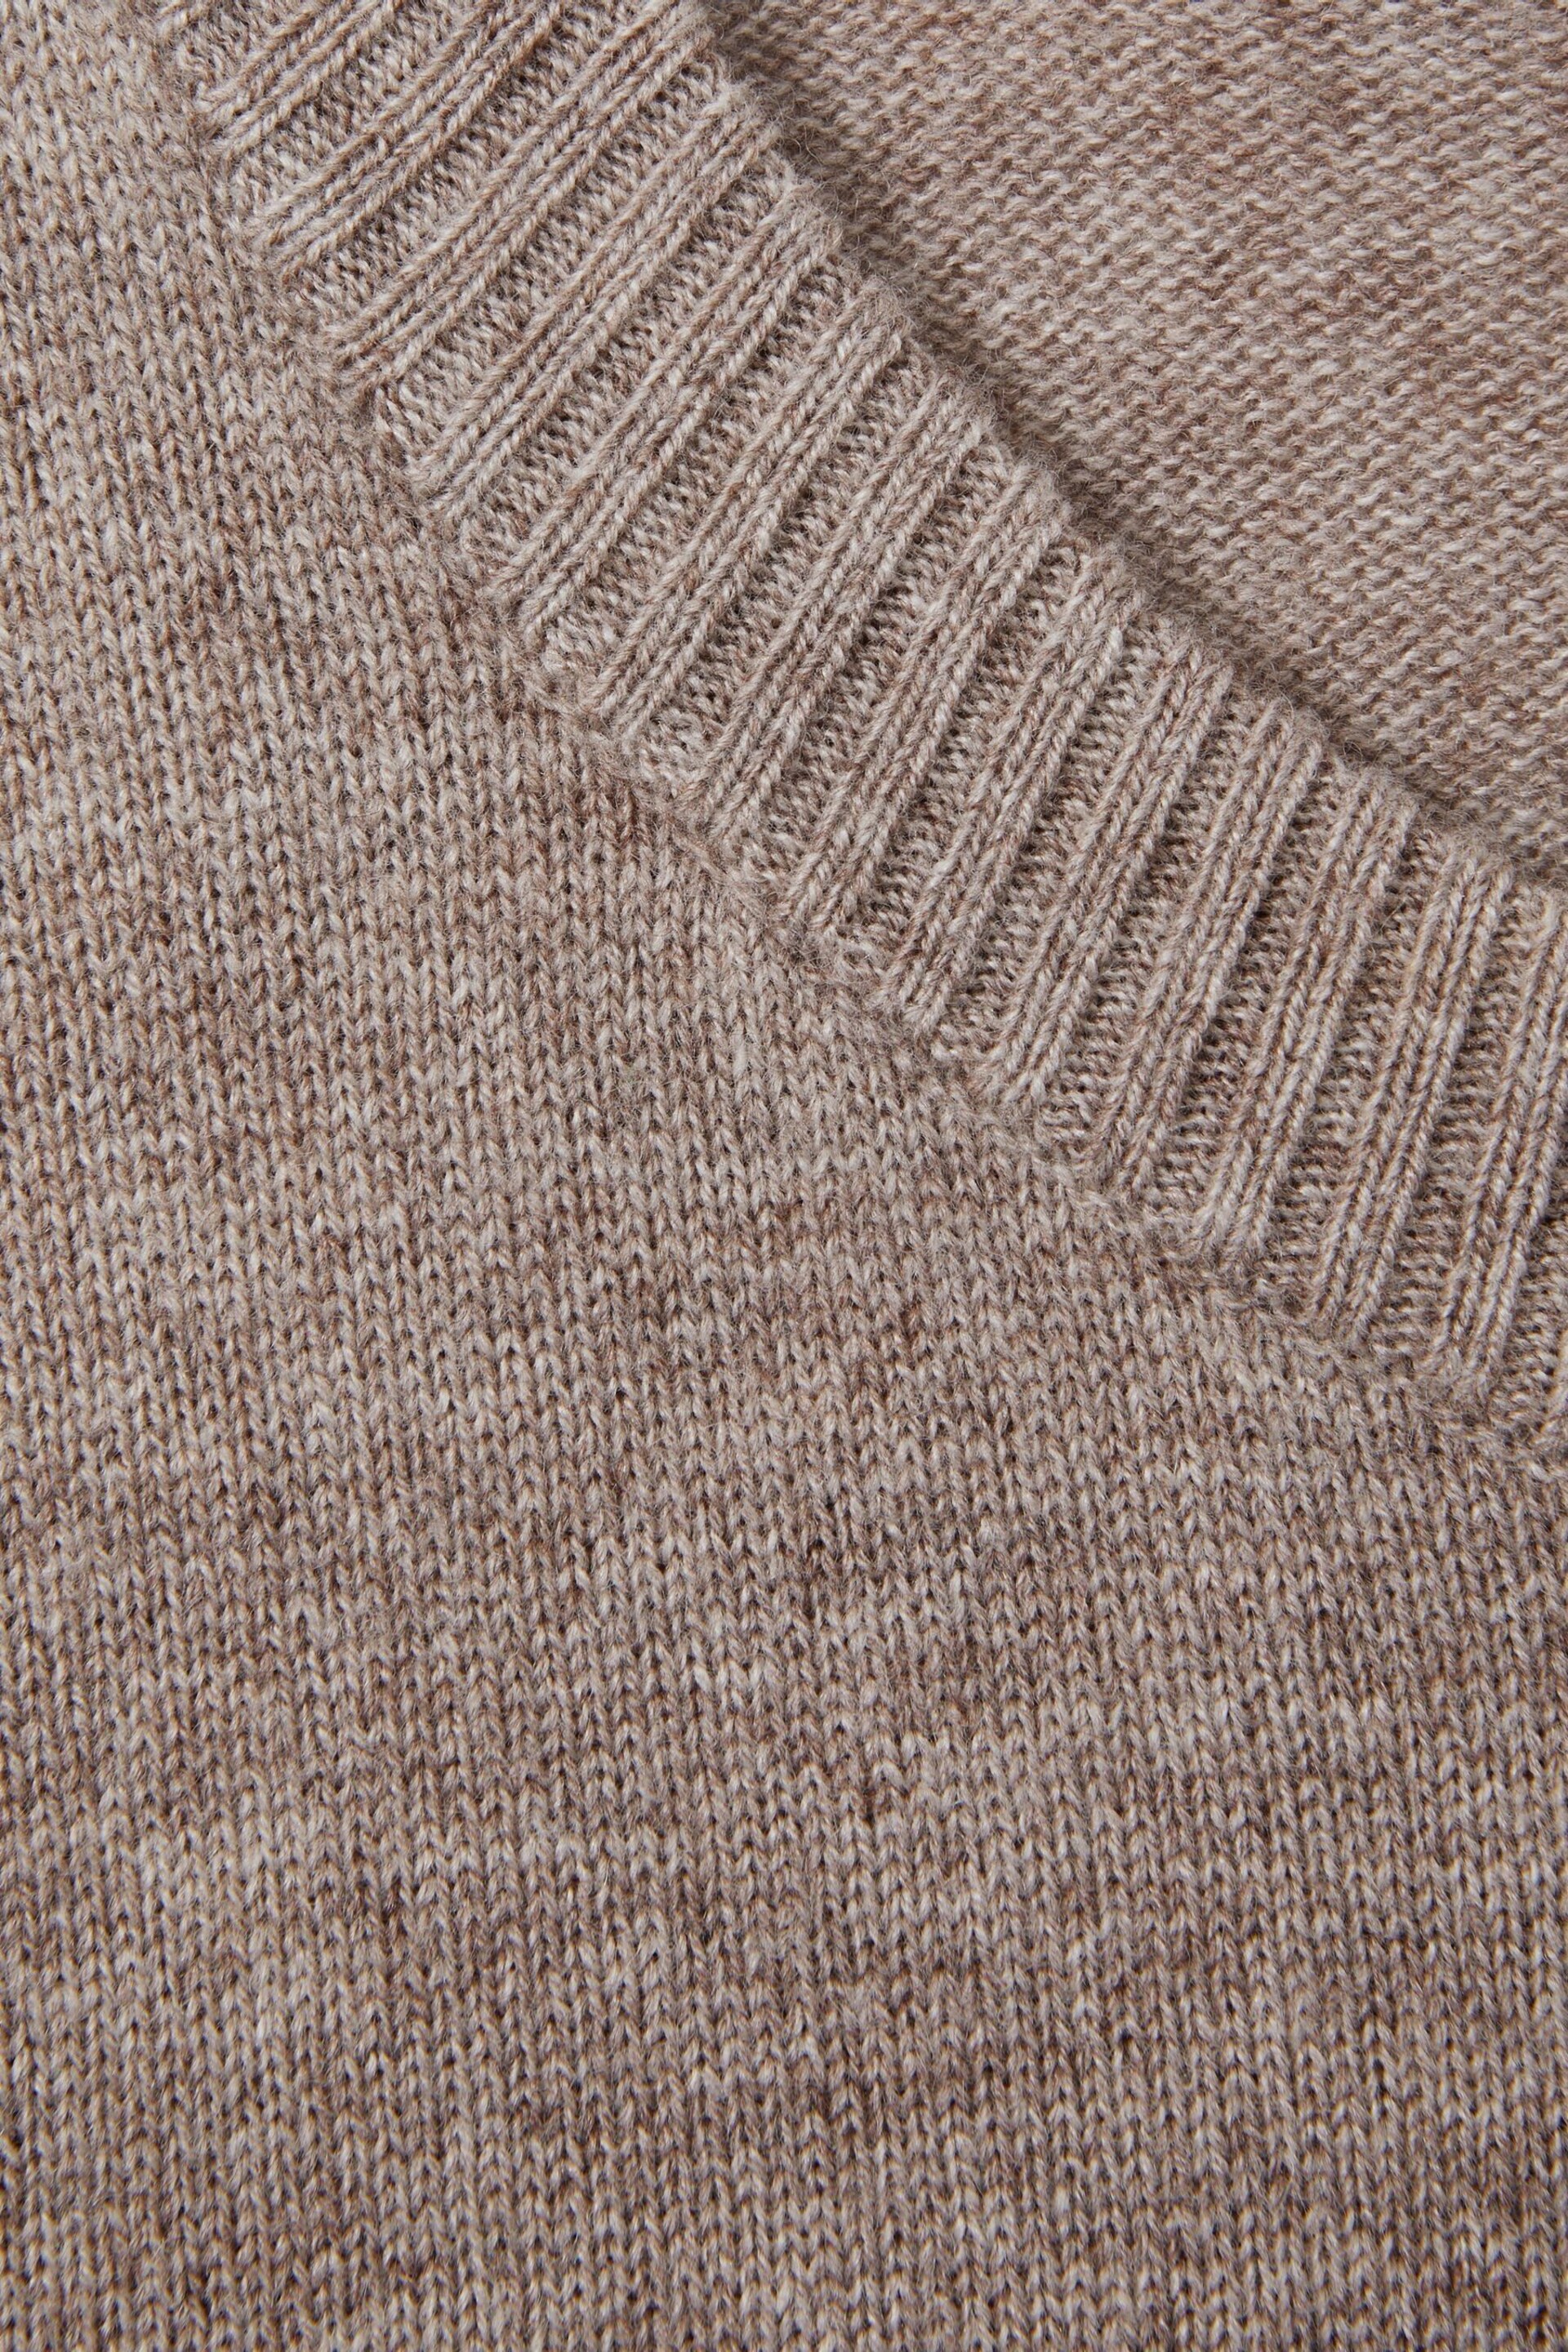 Reiss Neutral Annie Wool Blend Crew Neck Jumper with Cashmere - Image 5 of 5